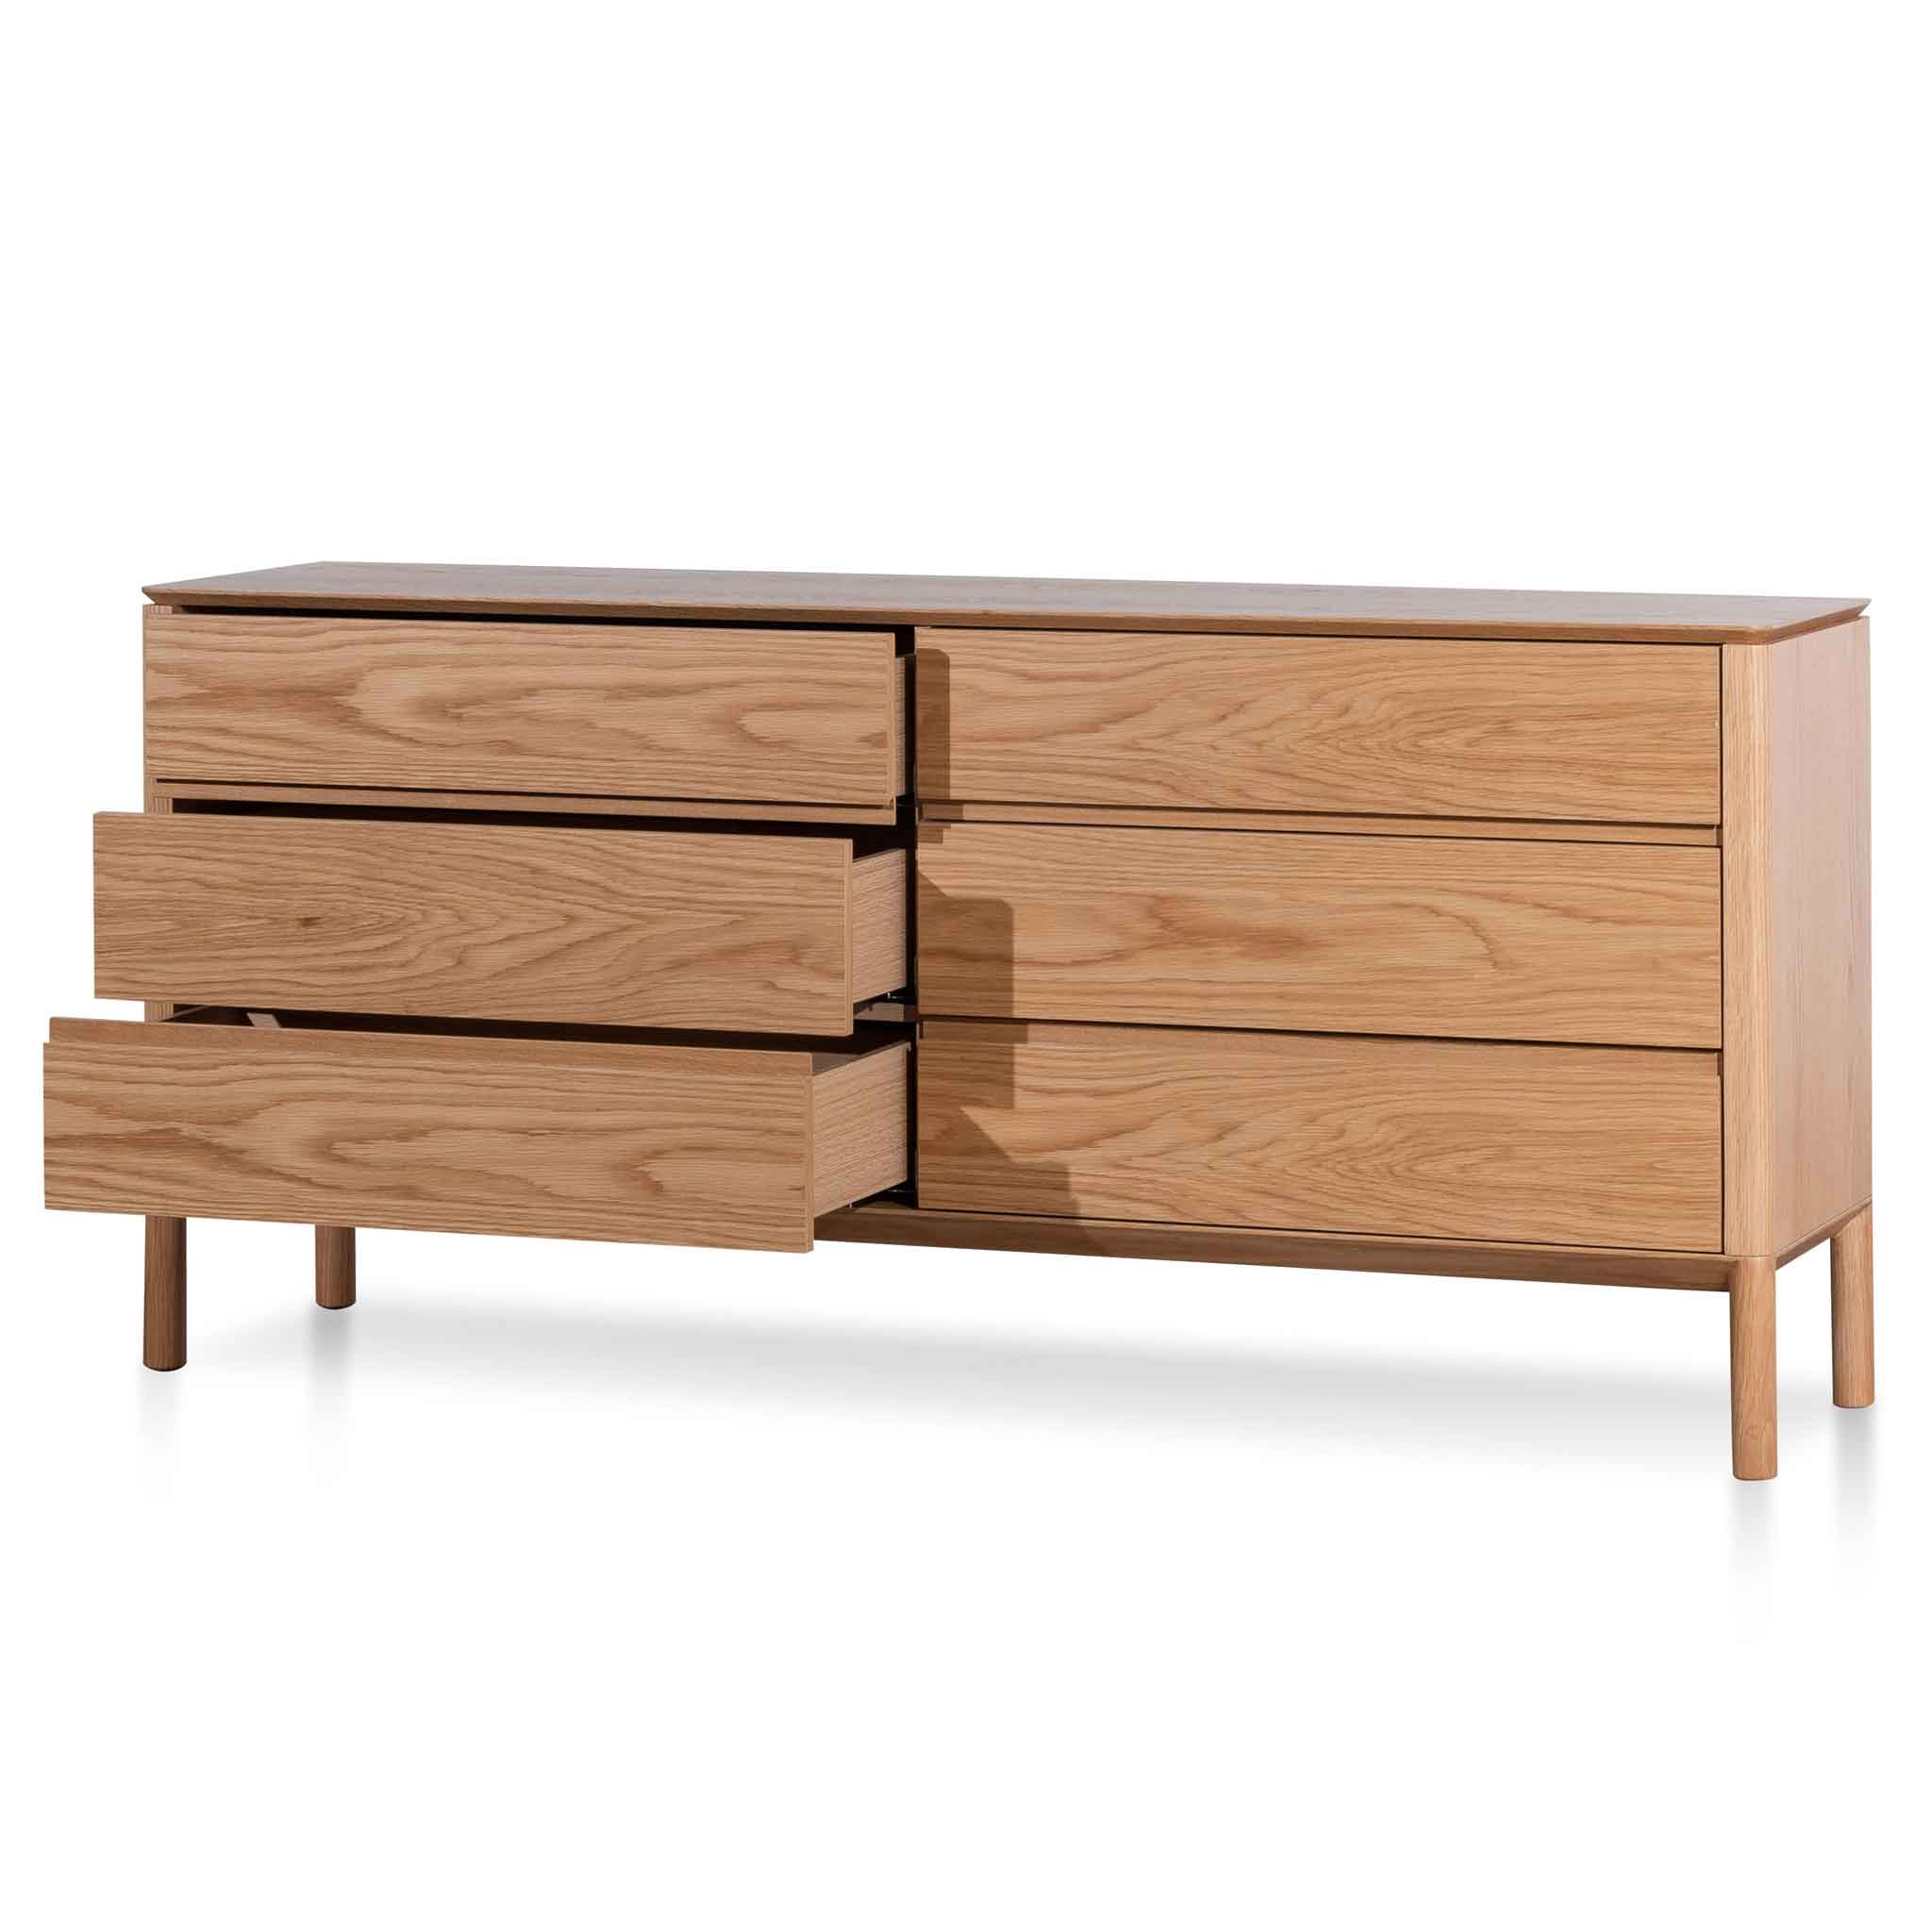 Owen 6 Drawers Wooden Chest - Natural - Dressers